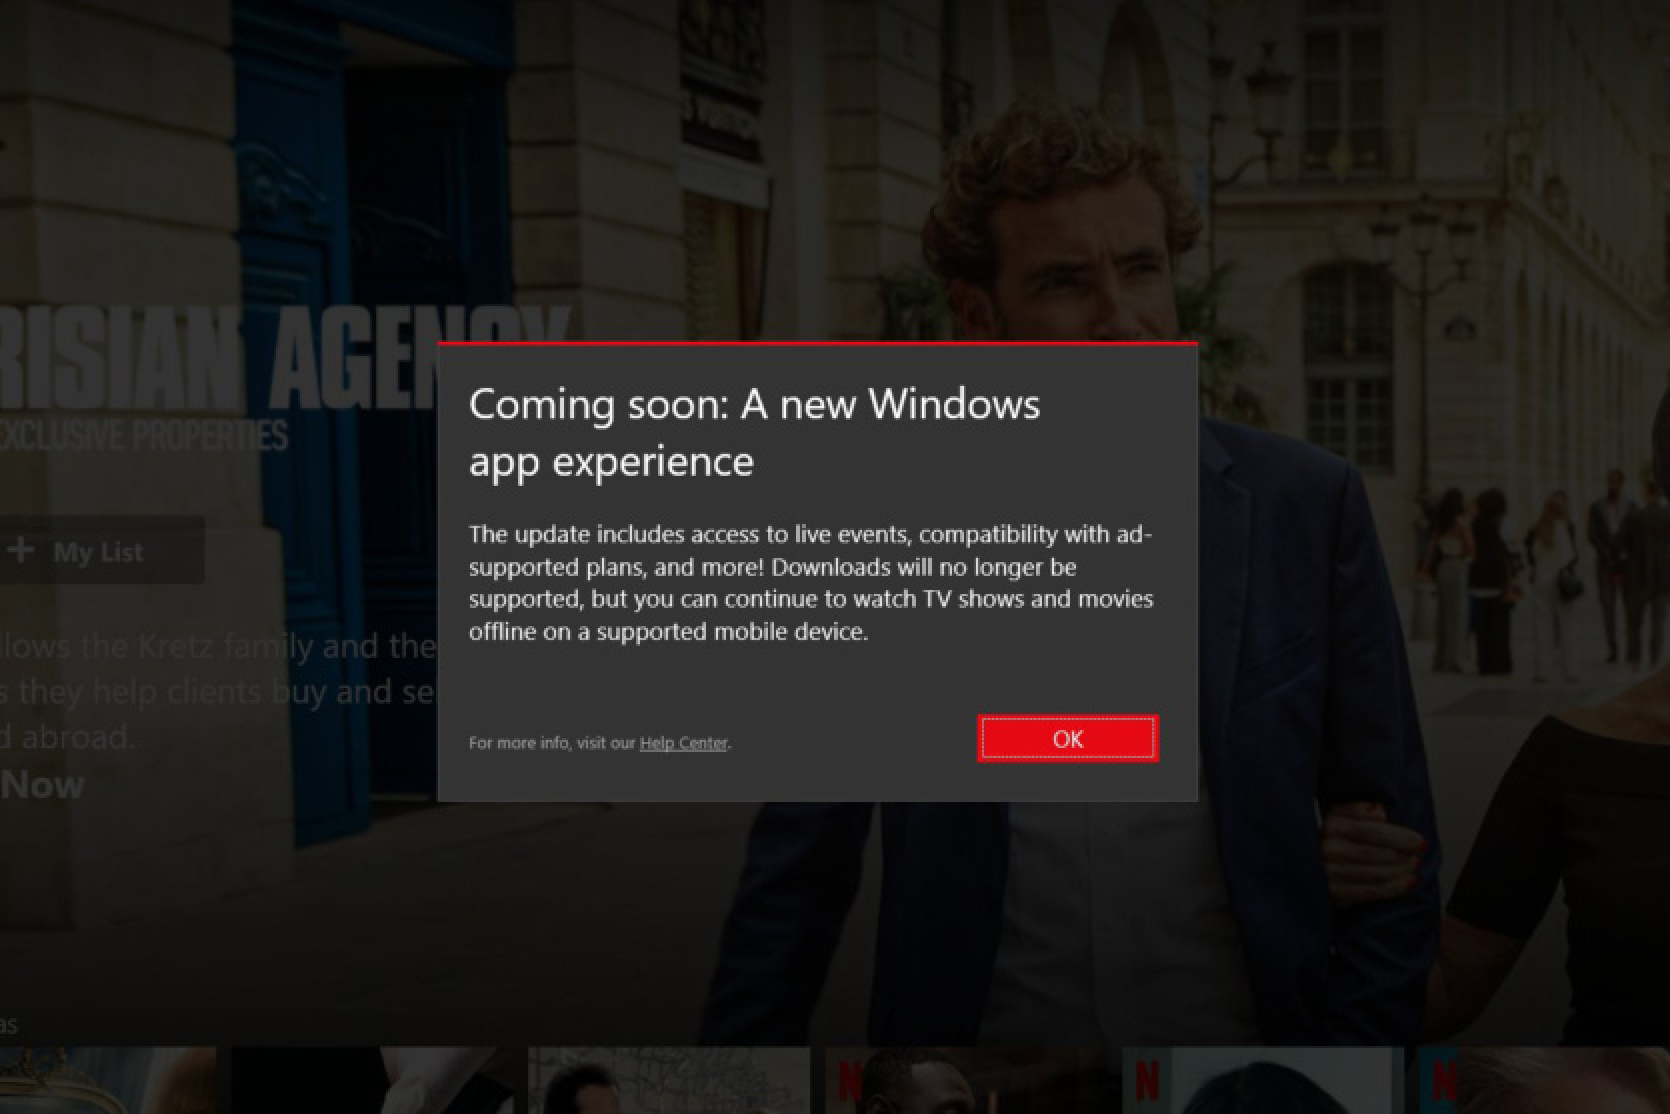 Netflix wants to disable downloading content on Windows - users get strange messages